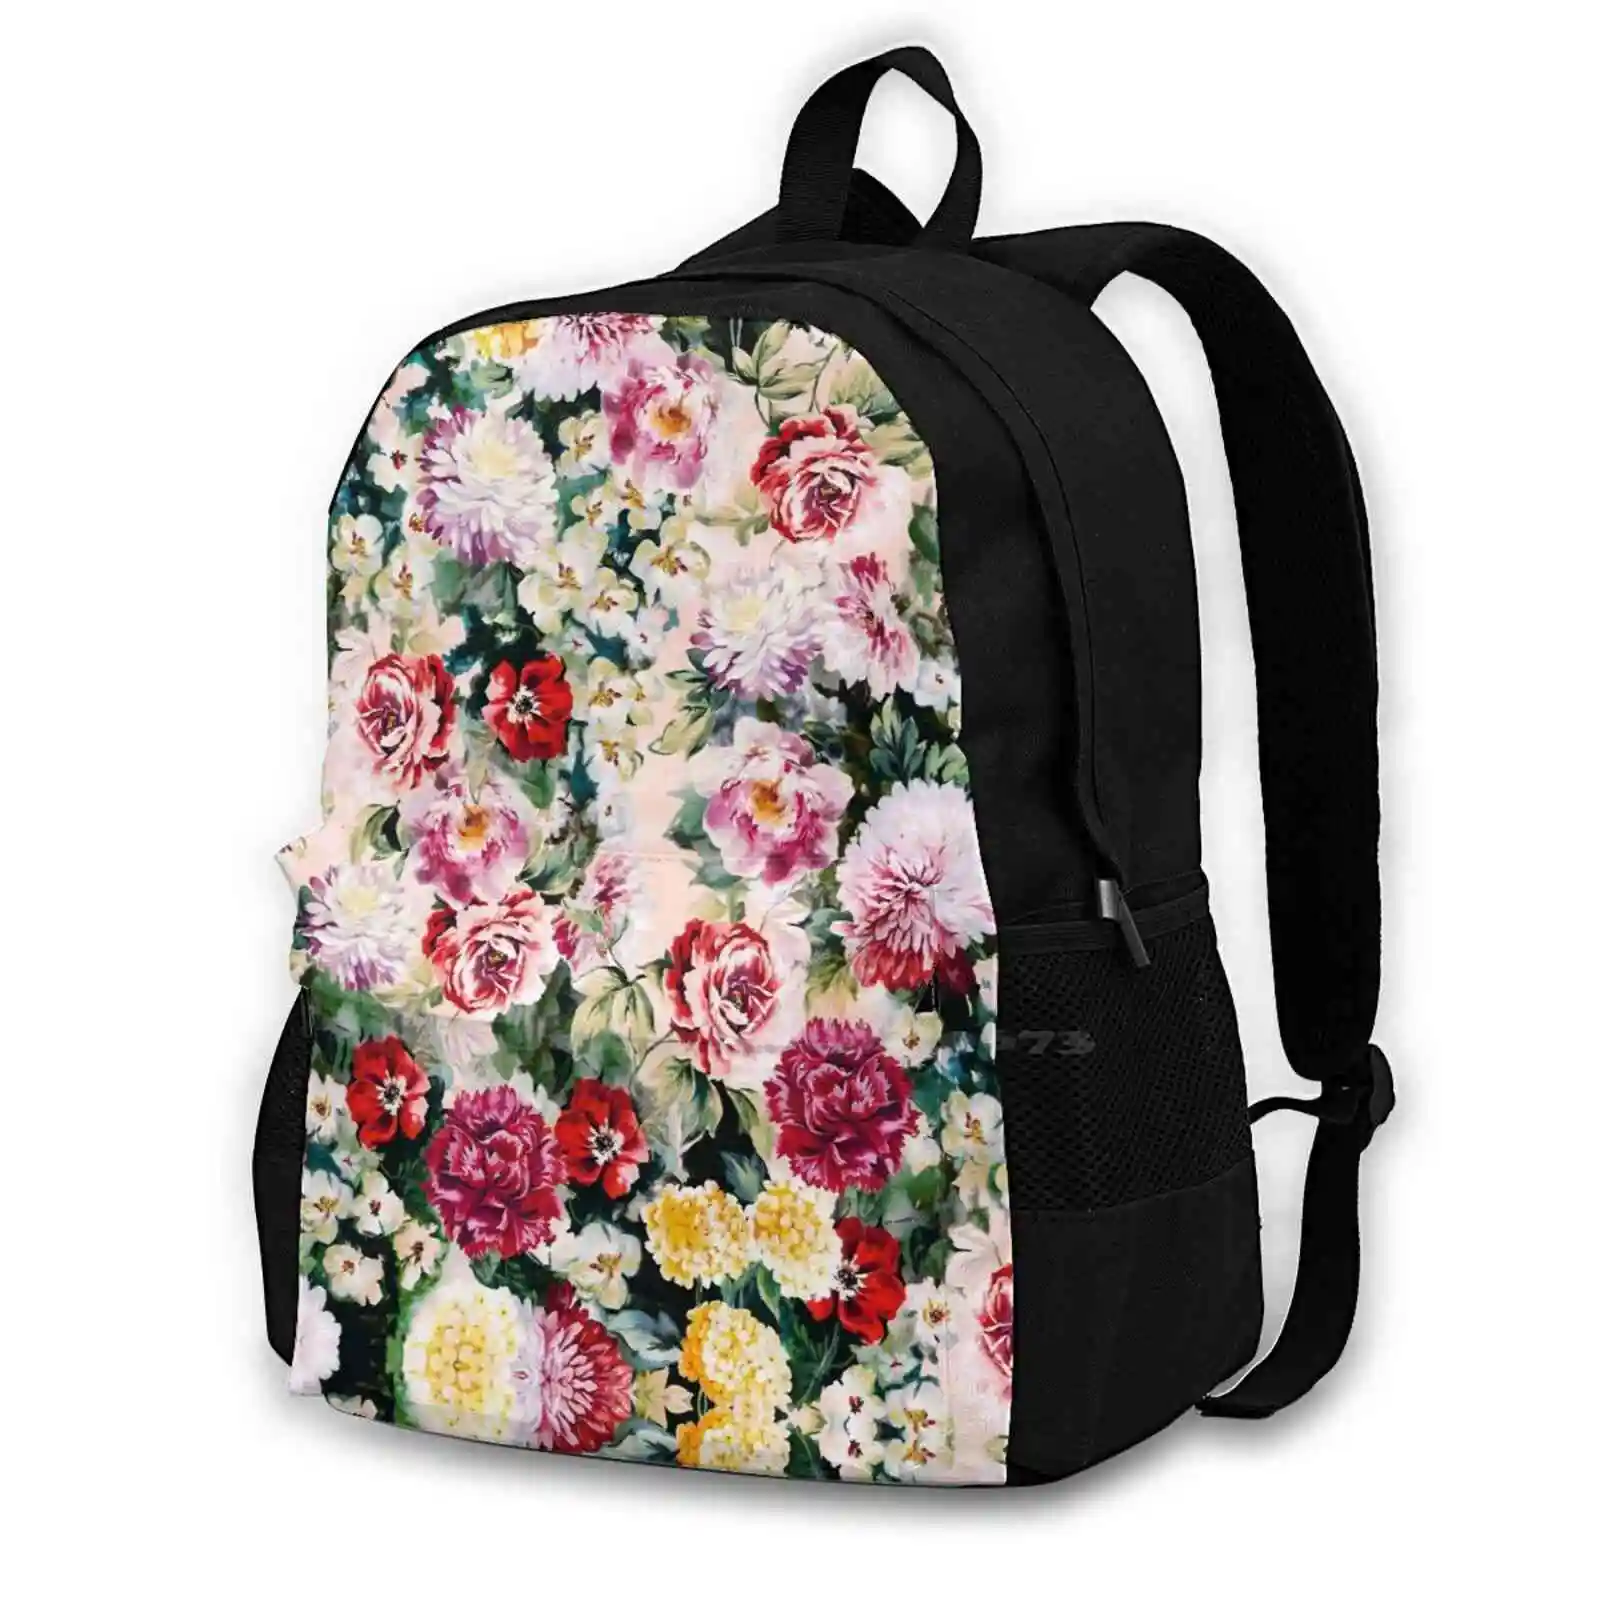 

Watercolor Mix Flowers Pattern Print Large Capacity Fashion Backpack Laptop Travel Bags Flowers Flower Roses Nature Spring